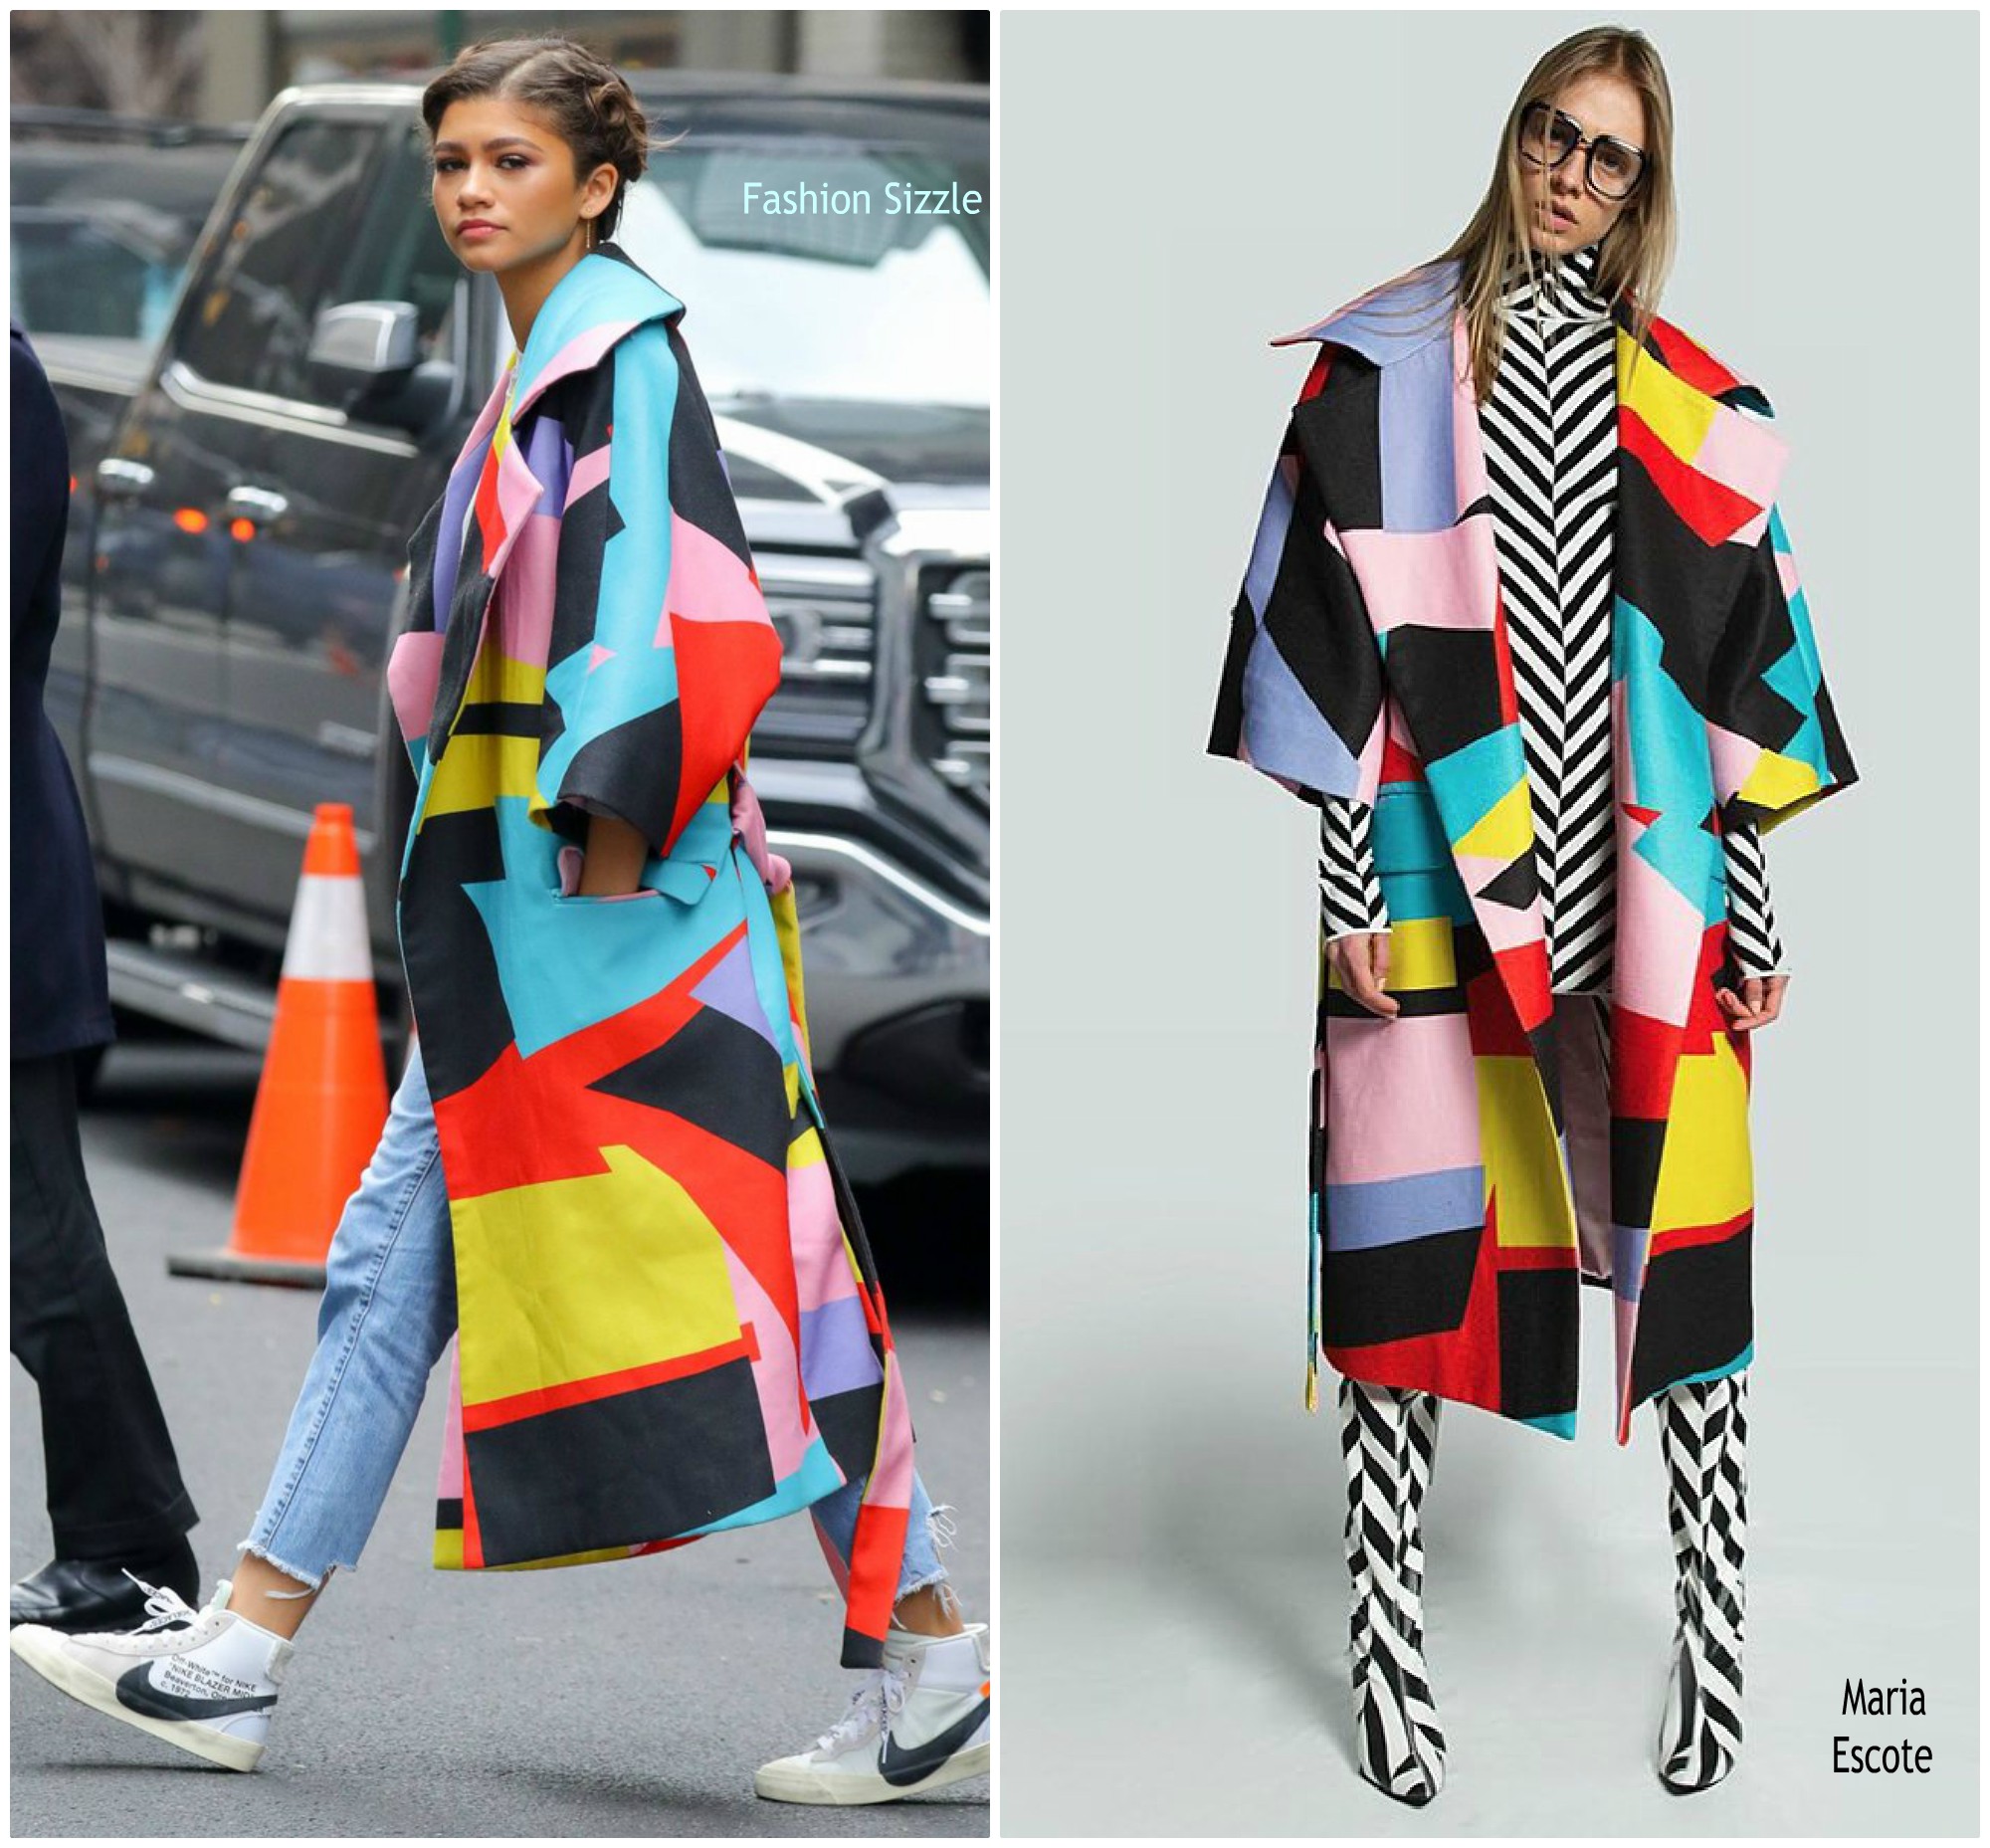 Zendaya  In Maria Escote  – “The  Late Late Show with James Corden”